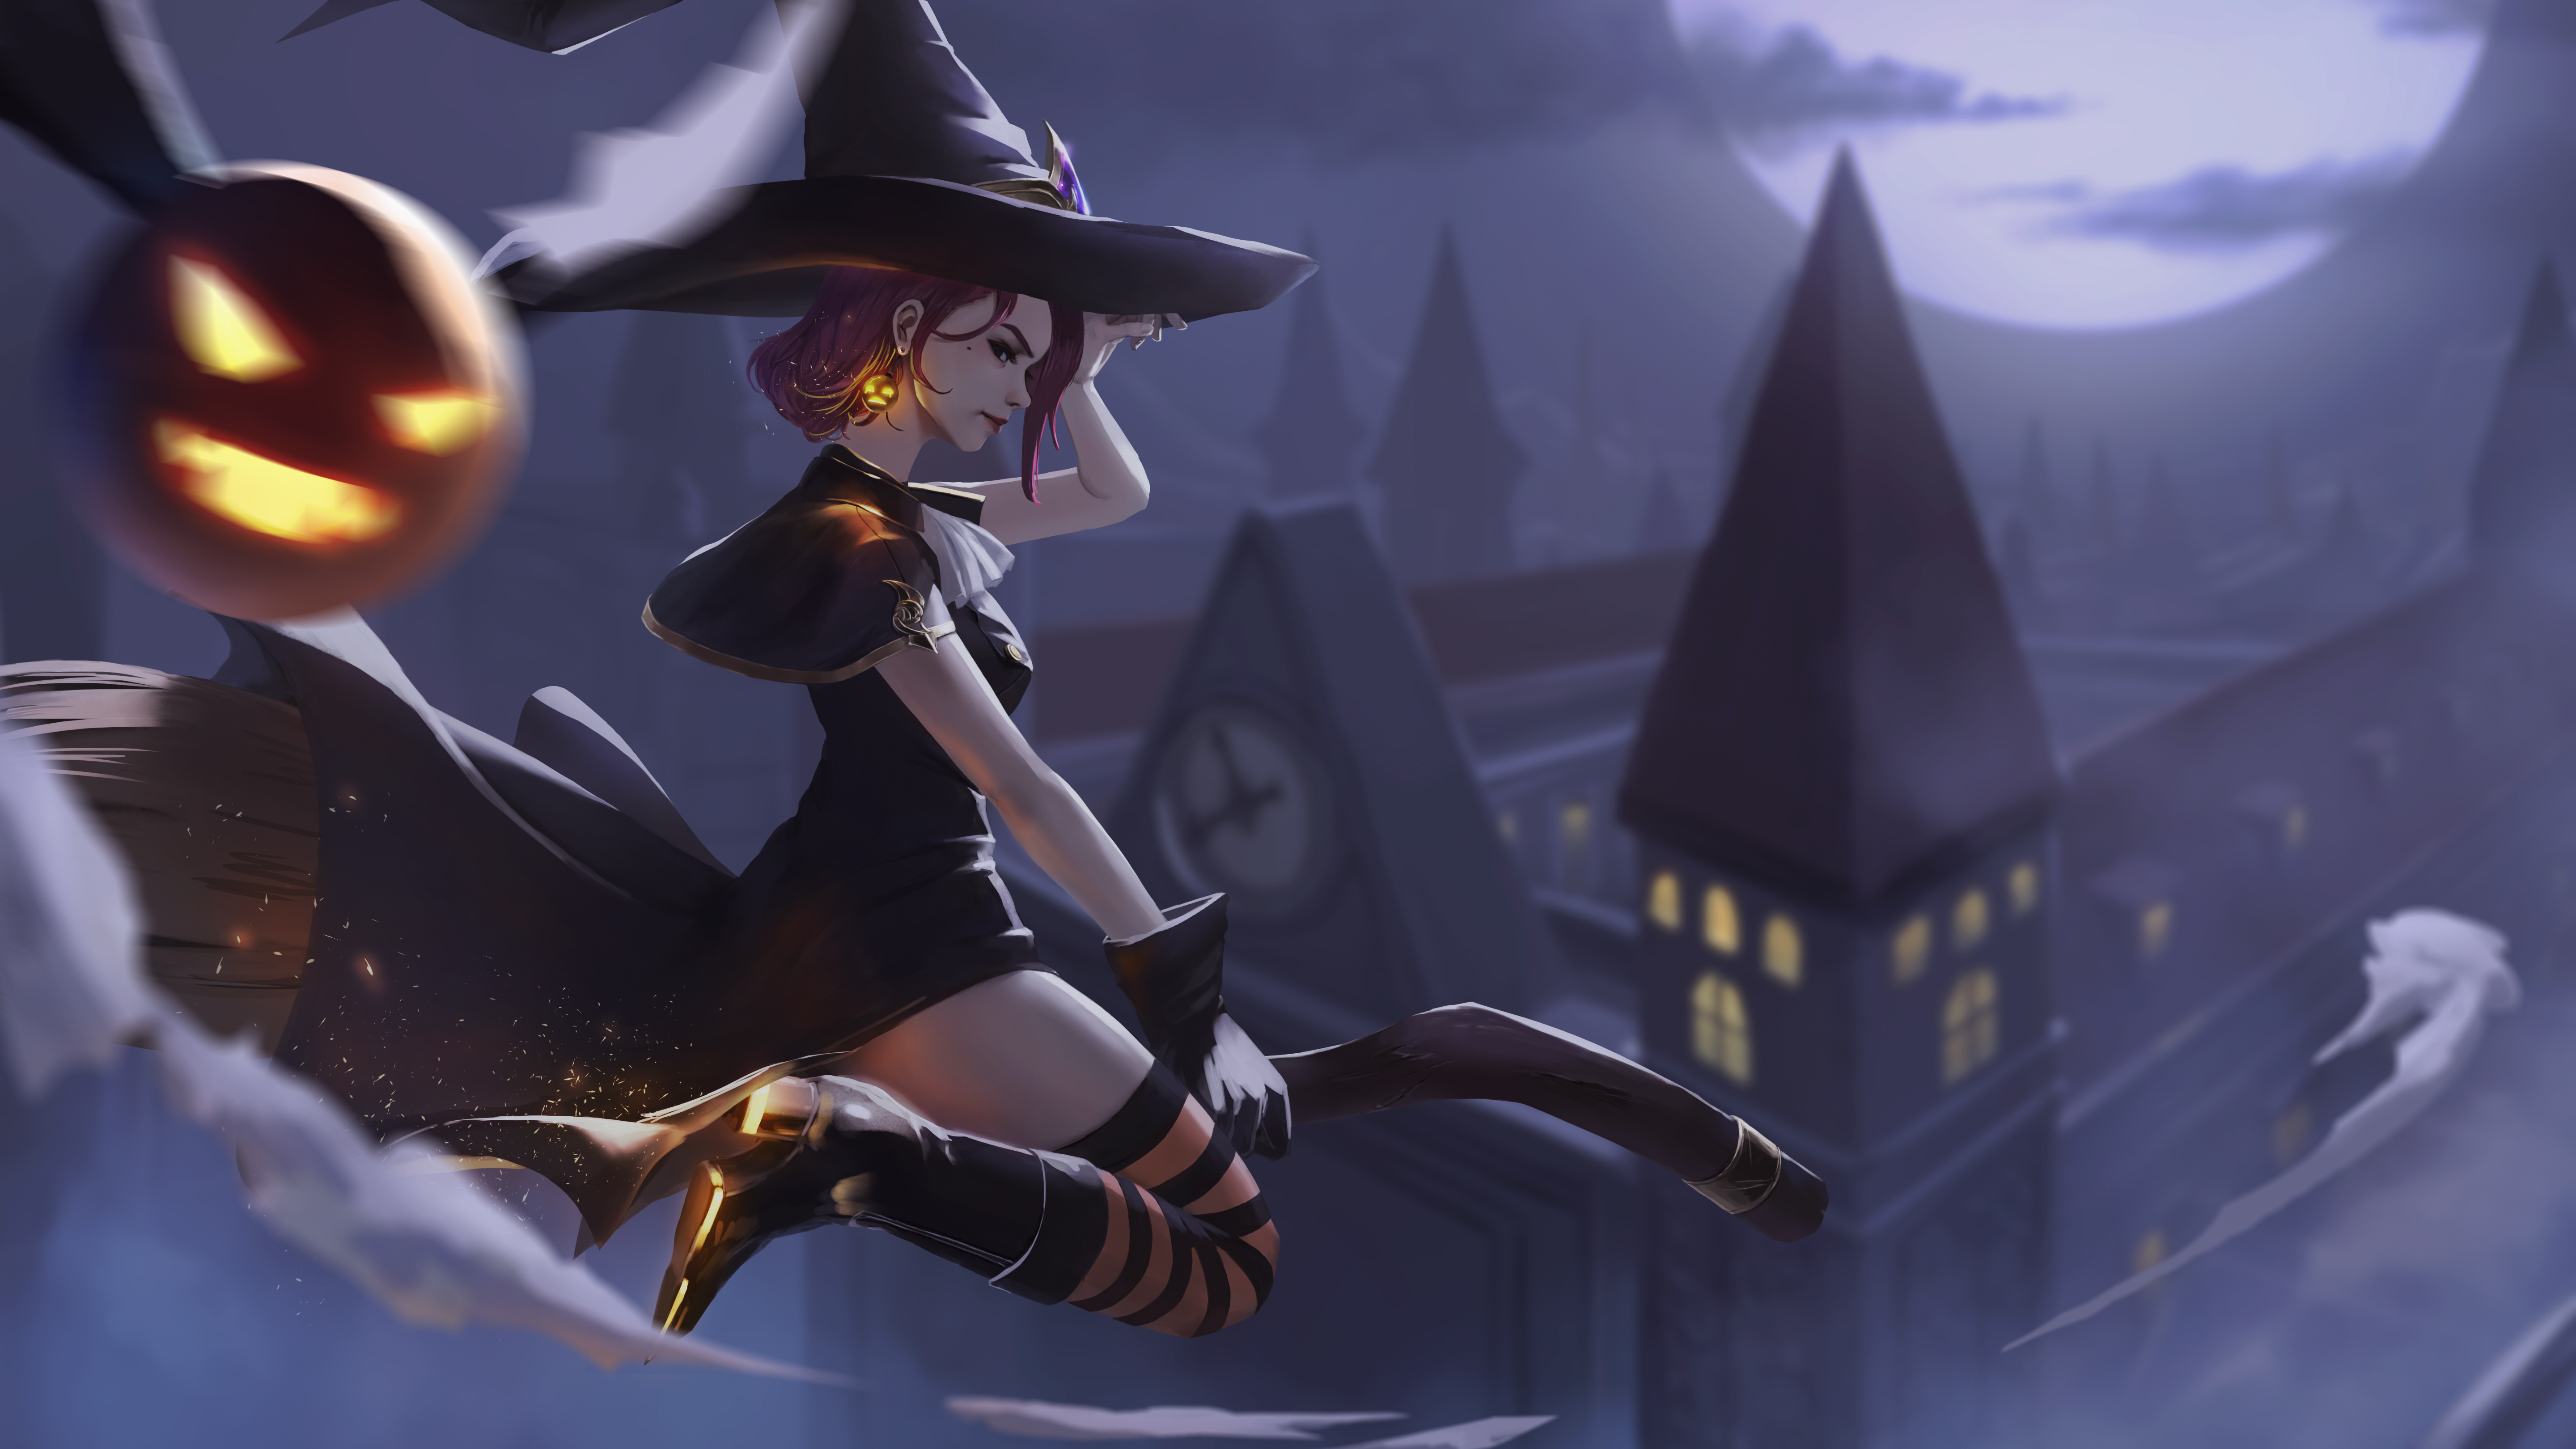 General 5760x3240 women fantasy girl witch witch hat women with hats fantasy art profile dress black dress thigh-highs striped stockings boots witch's broom depth of field bokeh flying moonlight night gloves purple hair Halloween original characters artwork drawing illustration digital art sparks Allen Hsieh full moon broom